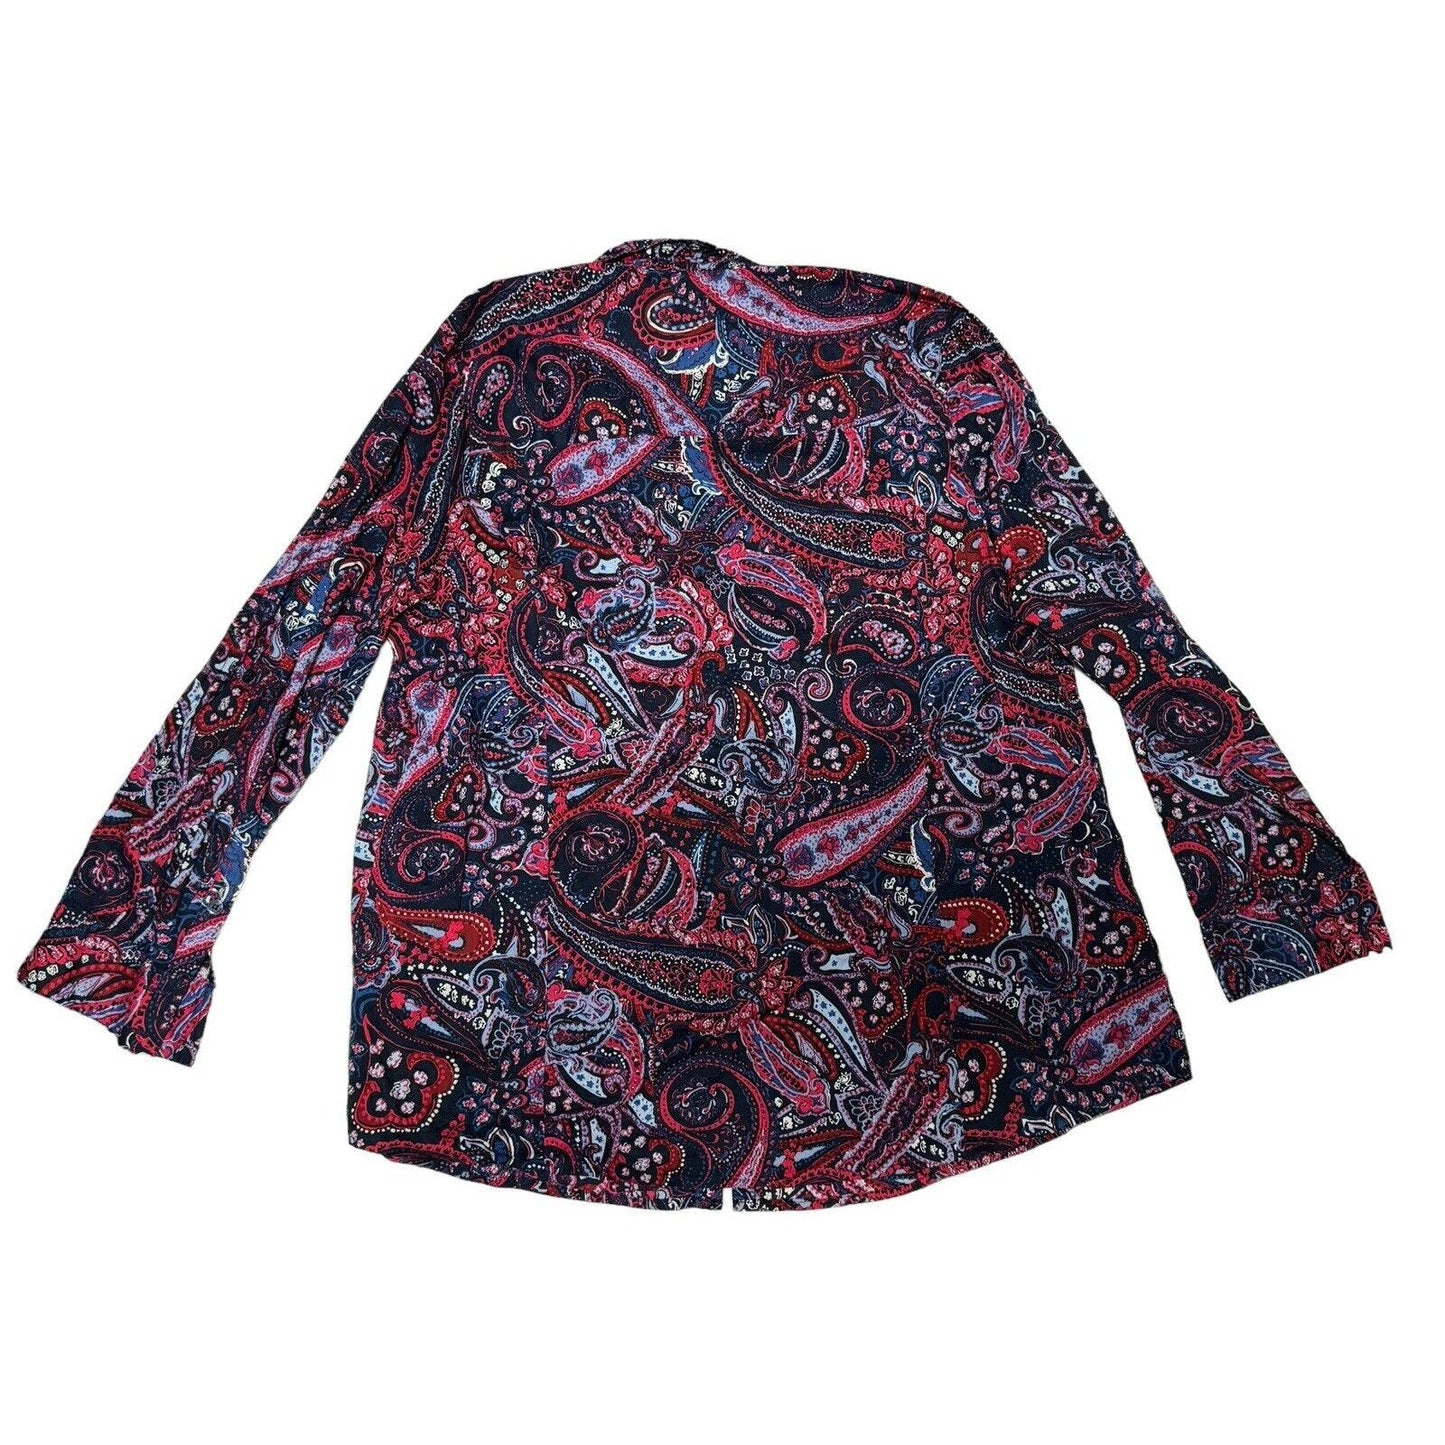 Catherine’s Paisley Long Sleeve Button Down Blouse Top Size 0X 14/16W